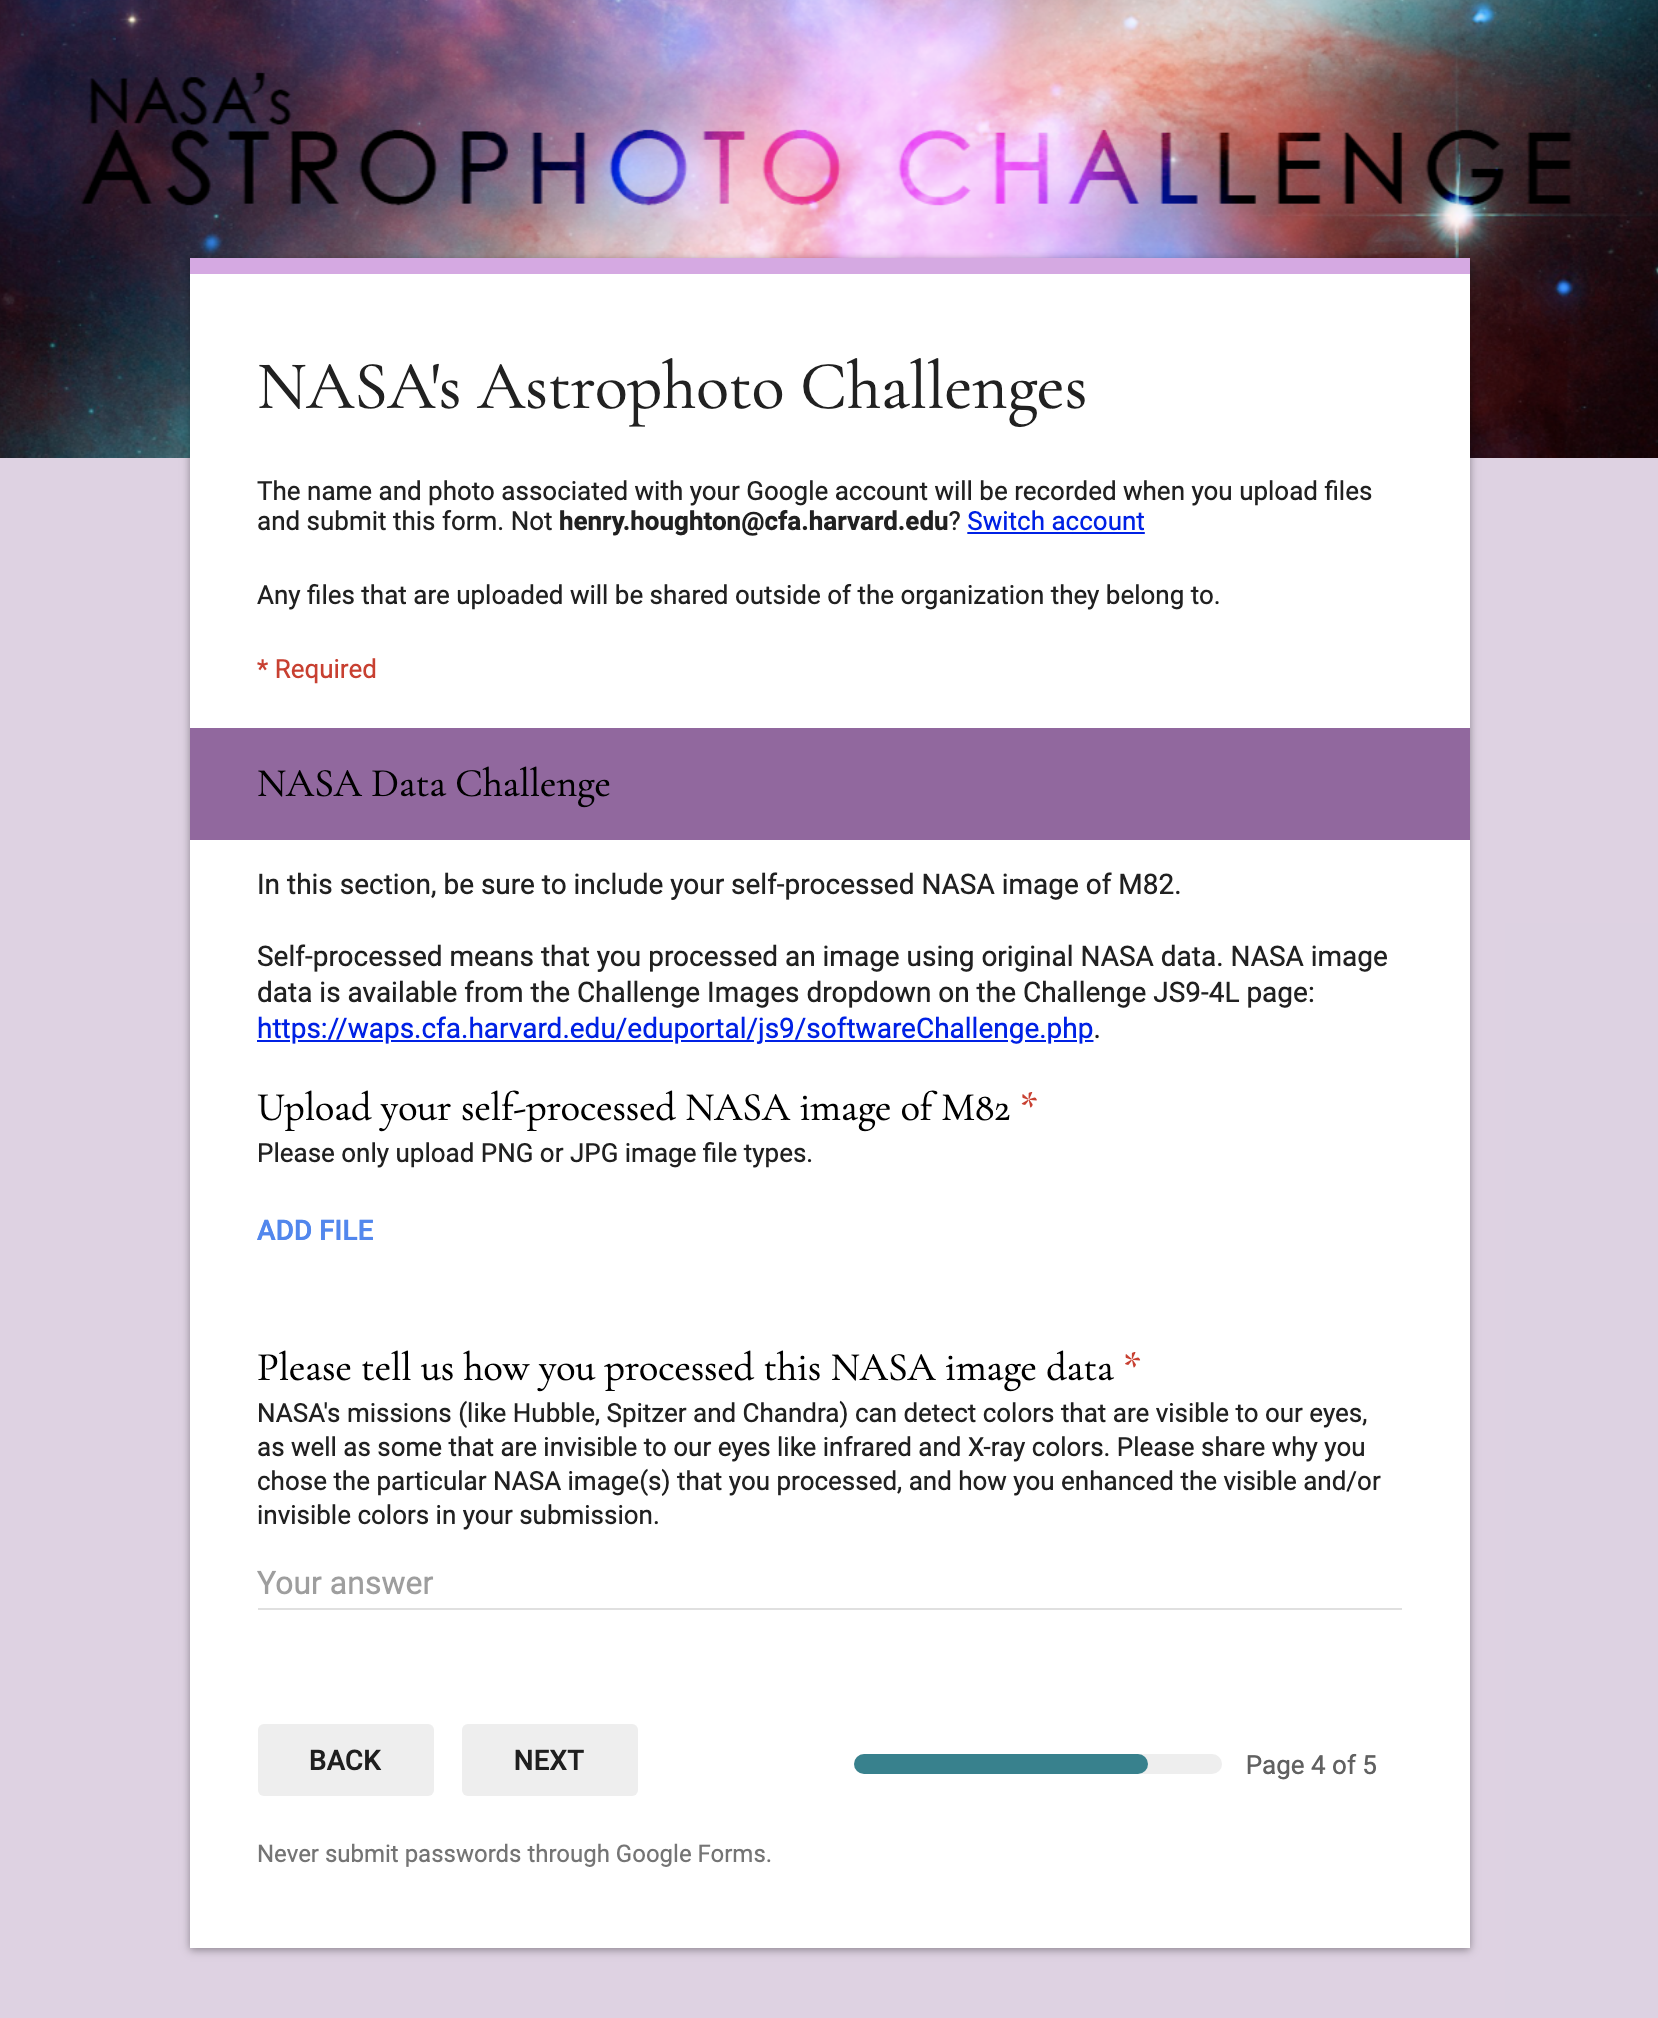 Submit your images to the NASA Data Challenge with this form